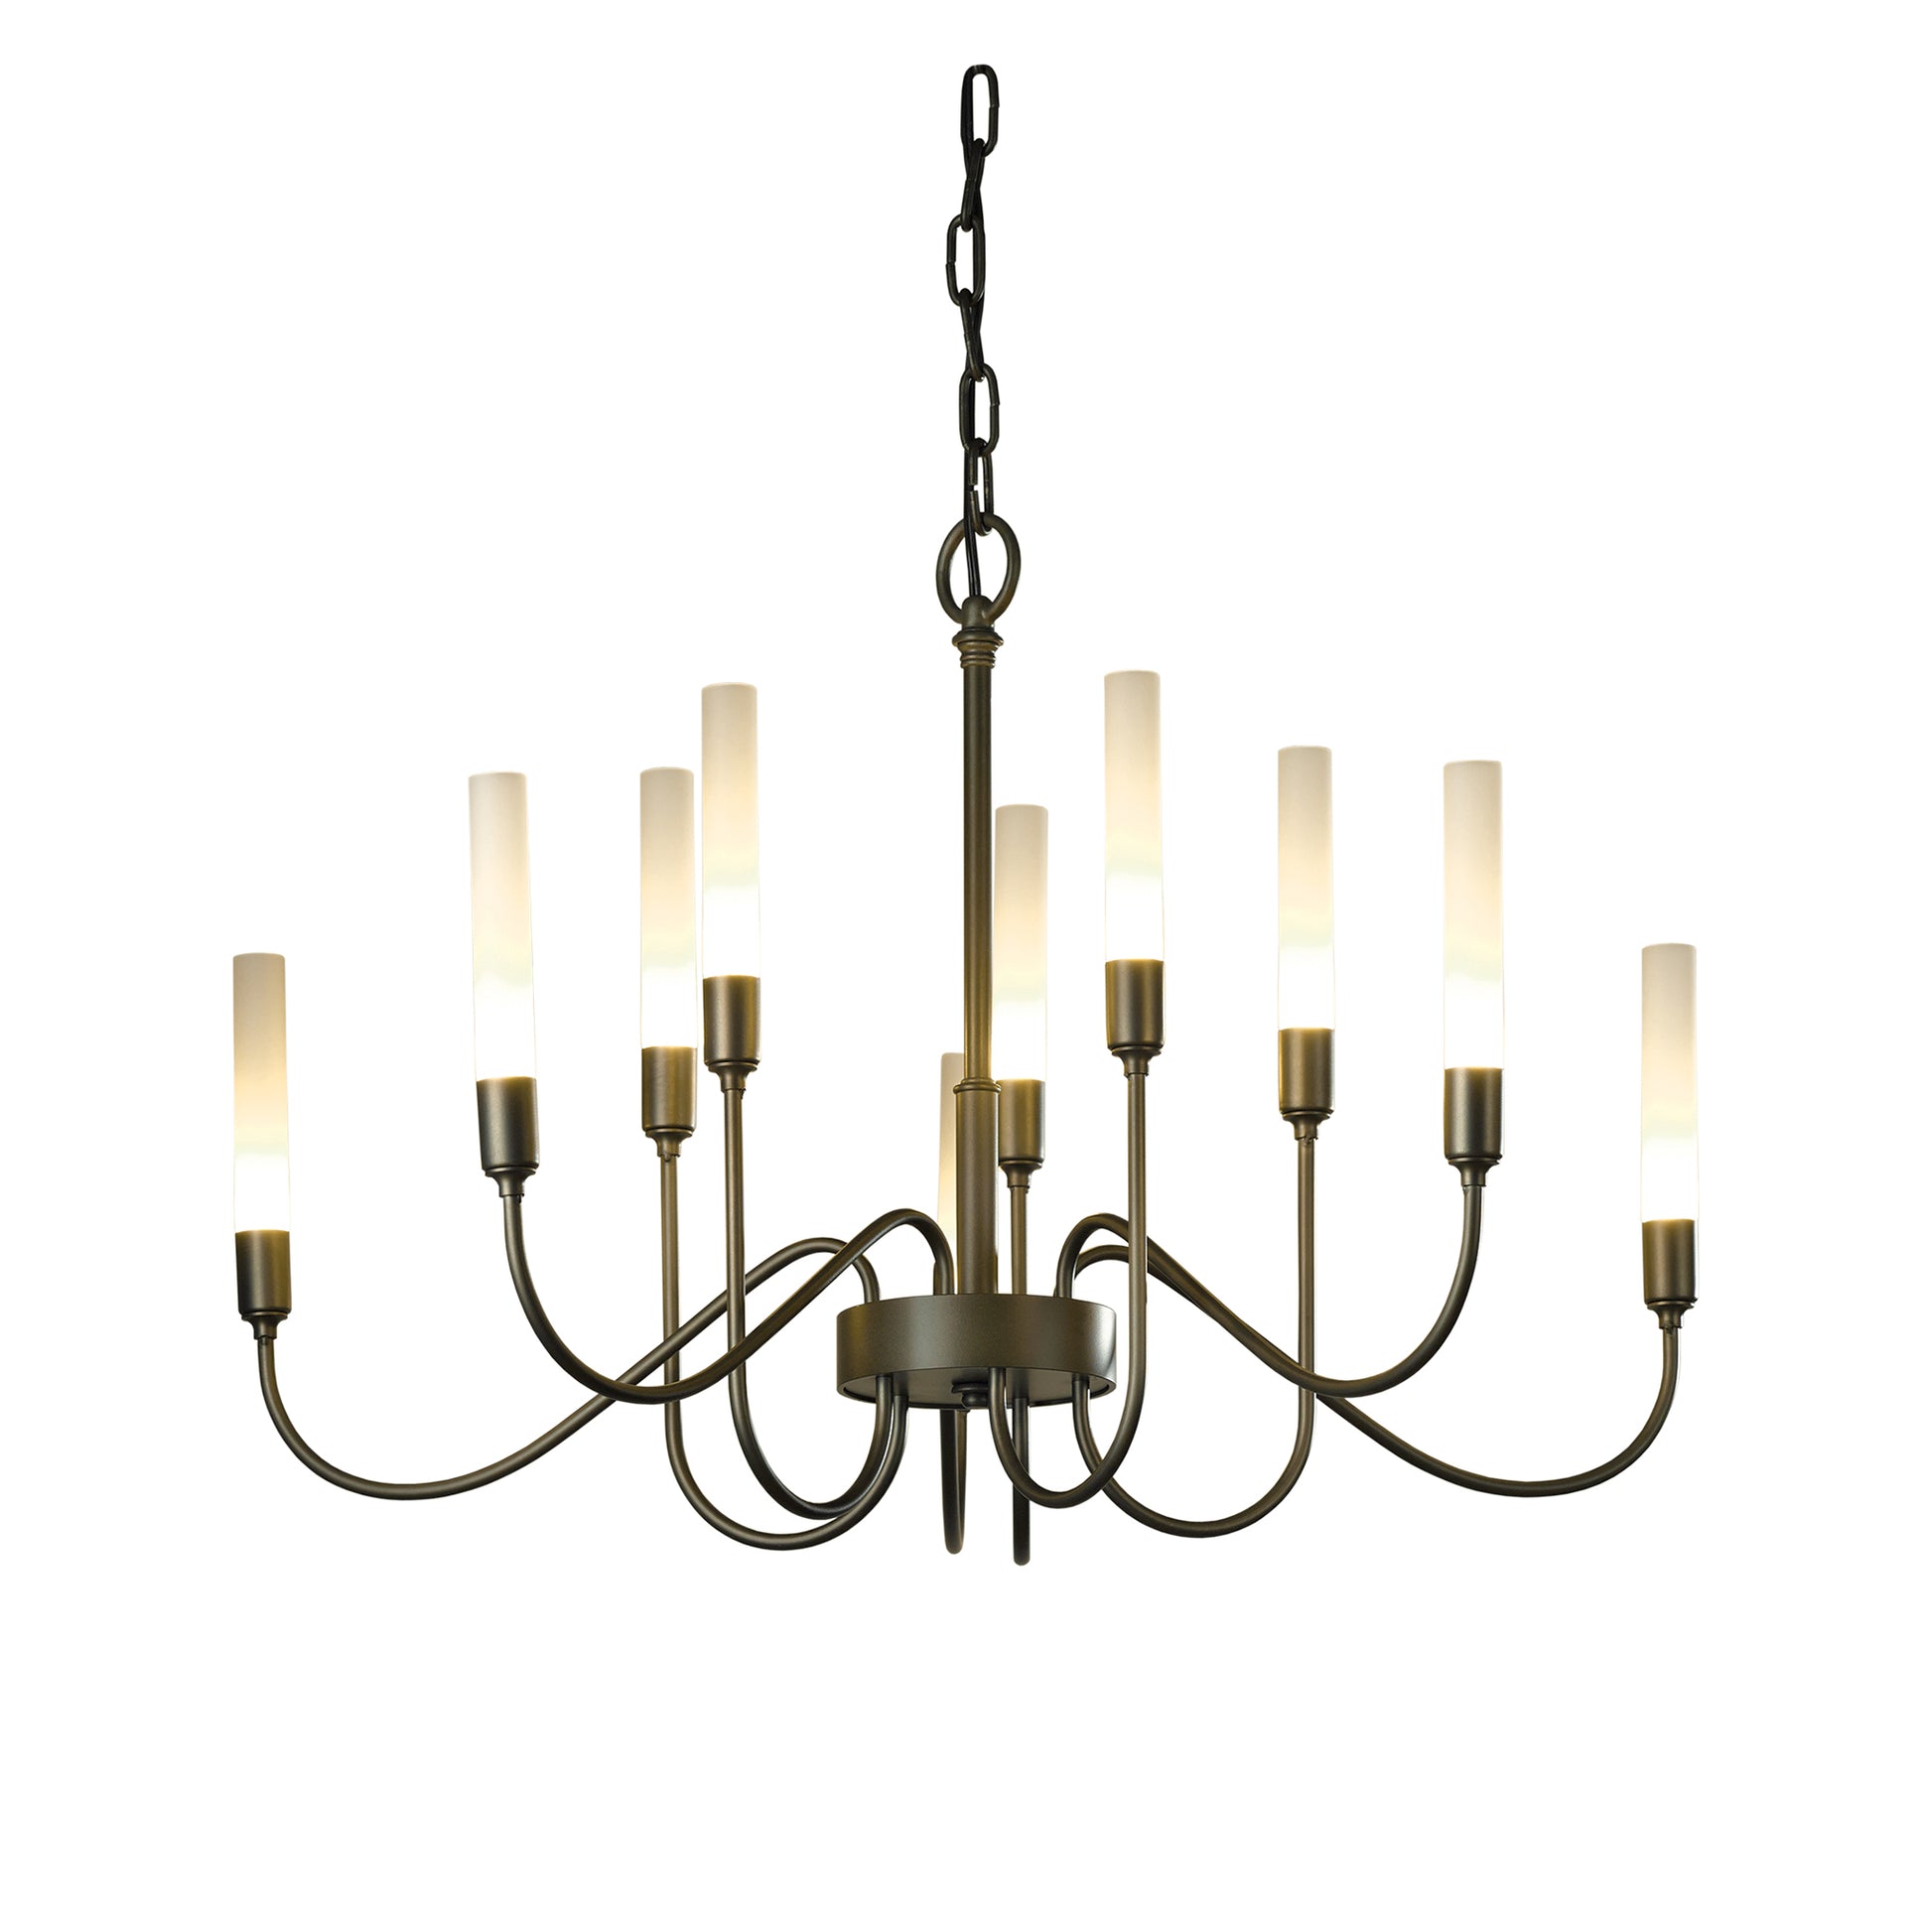 The Lisse 10-Arm Chandelier, handcrafted in Vermont by Hubbardton Forge, features six lights in a beautiful brass finish.